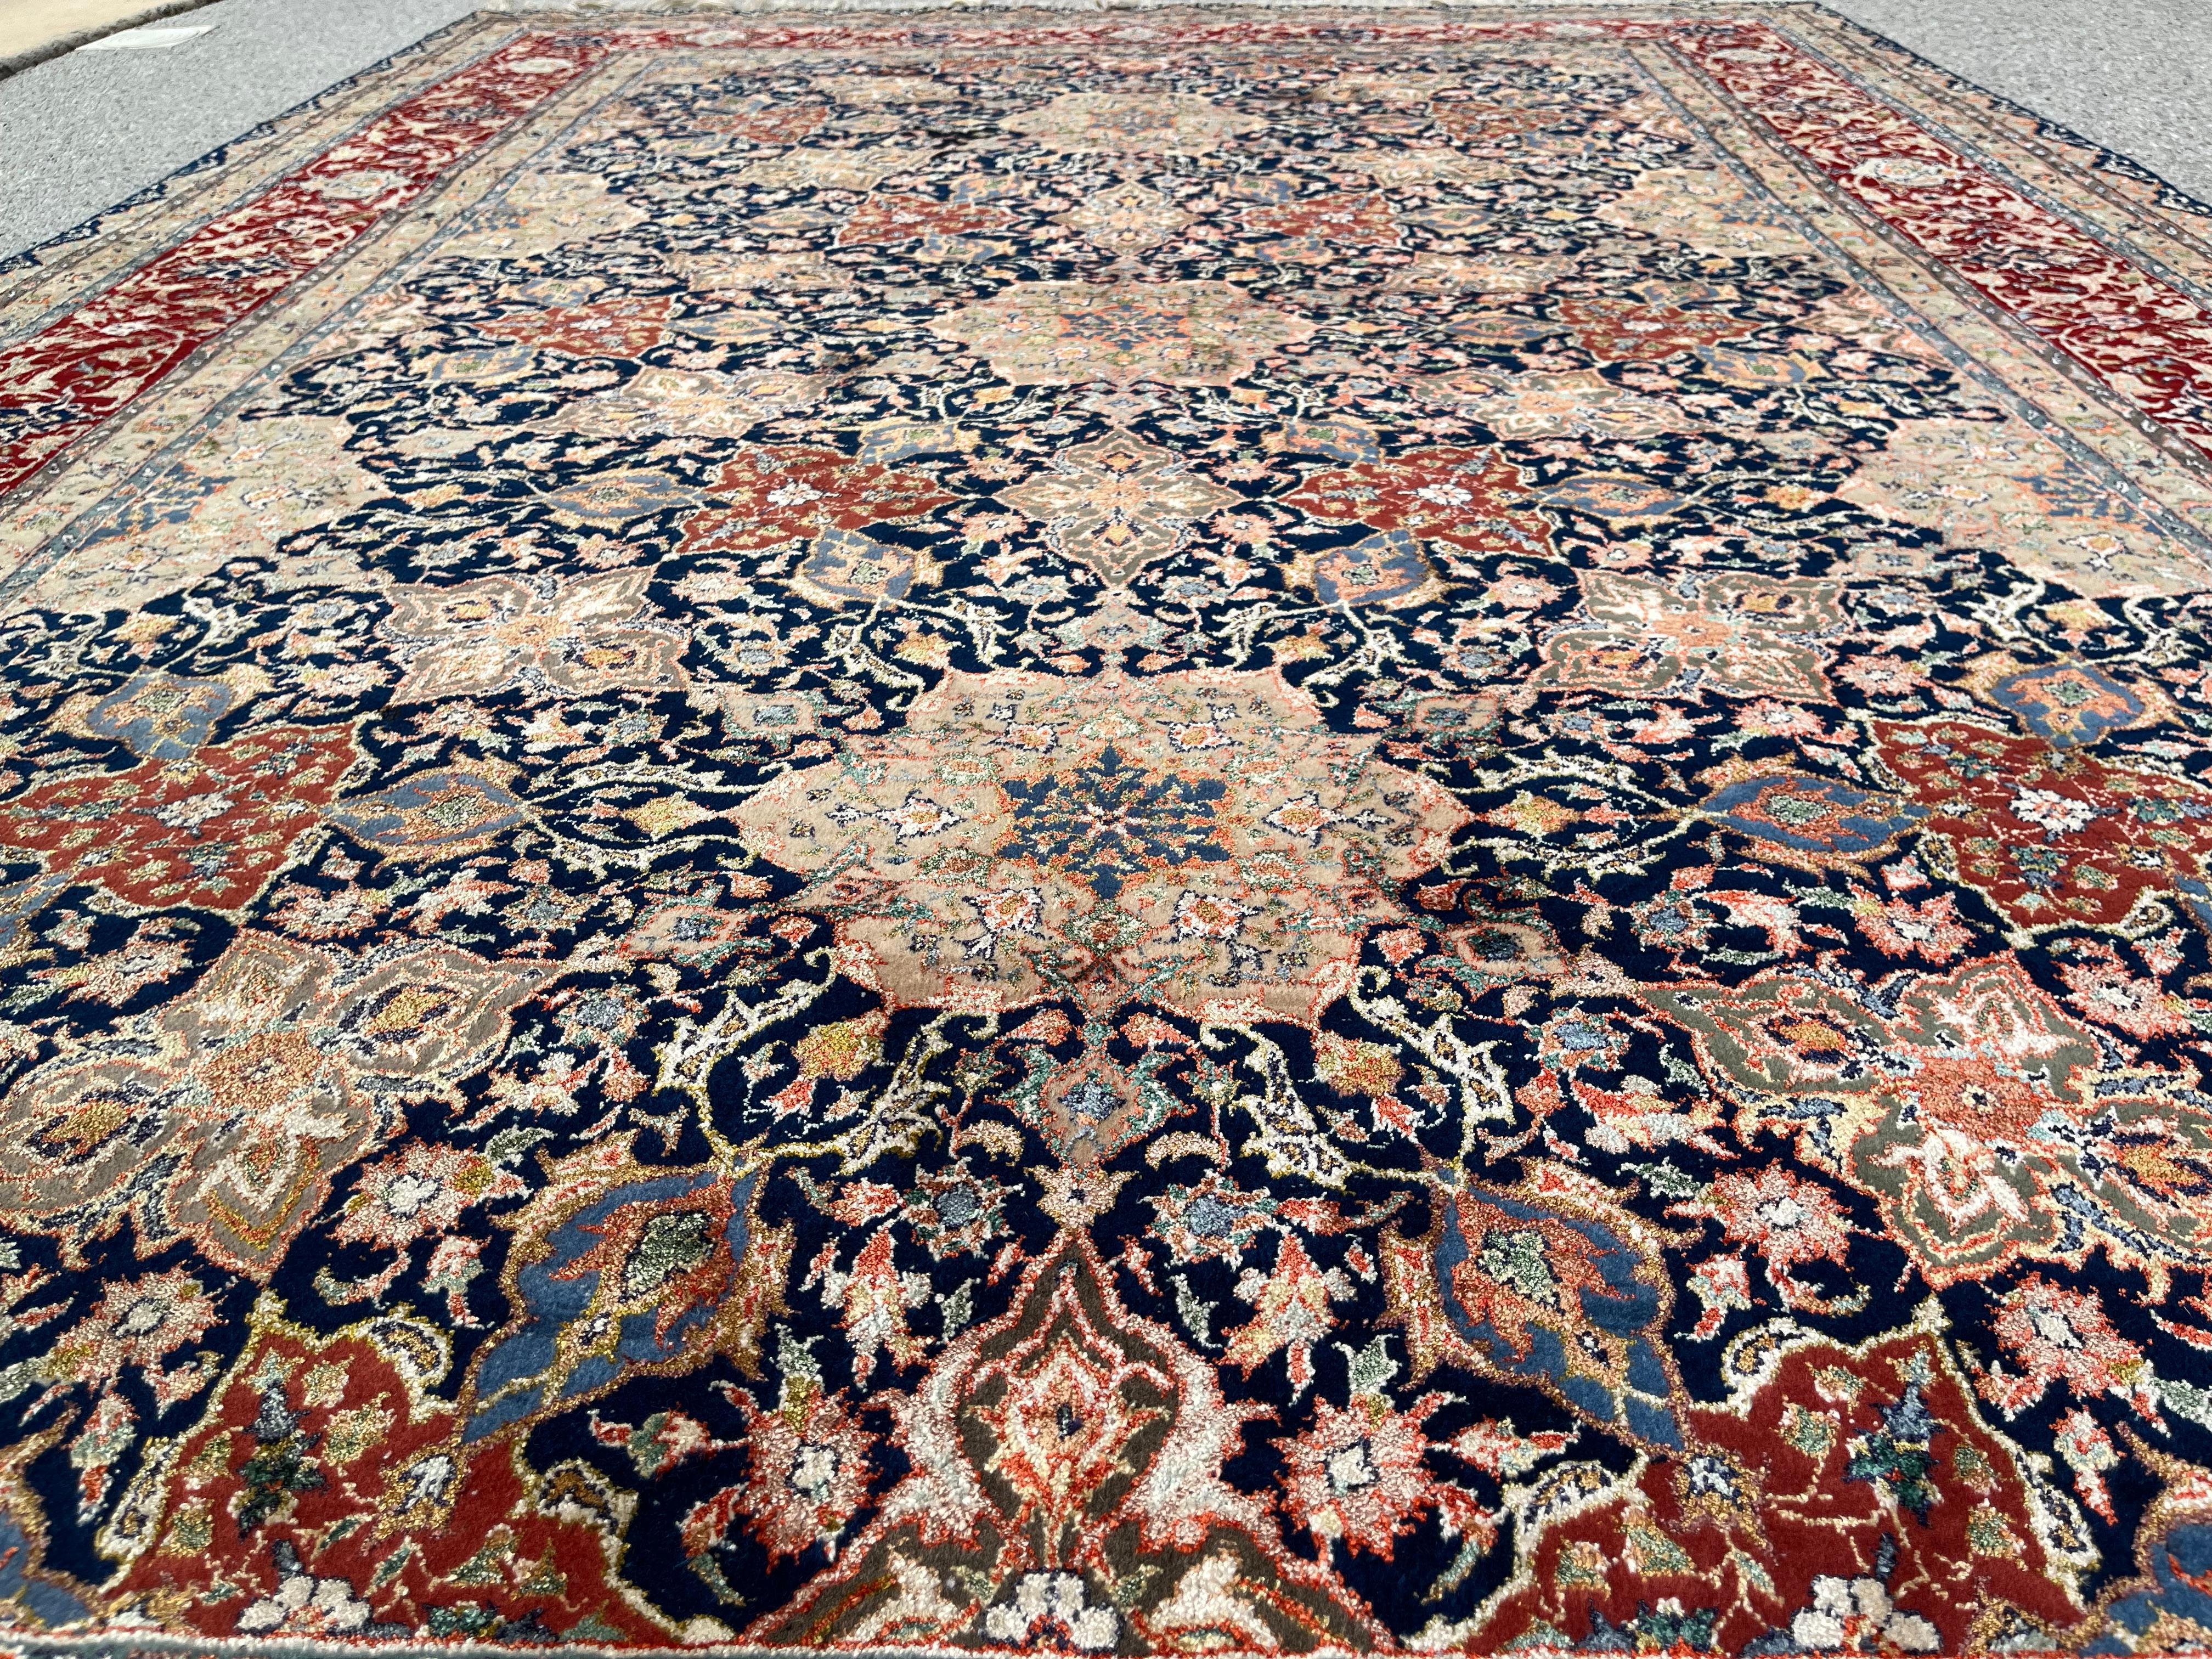 Hand-Woven Elegant Persian Rug, Indo-Ispahan in Wool and Silk on Silk, Extra Fine Quality For Sale